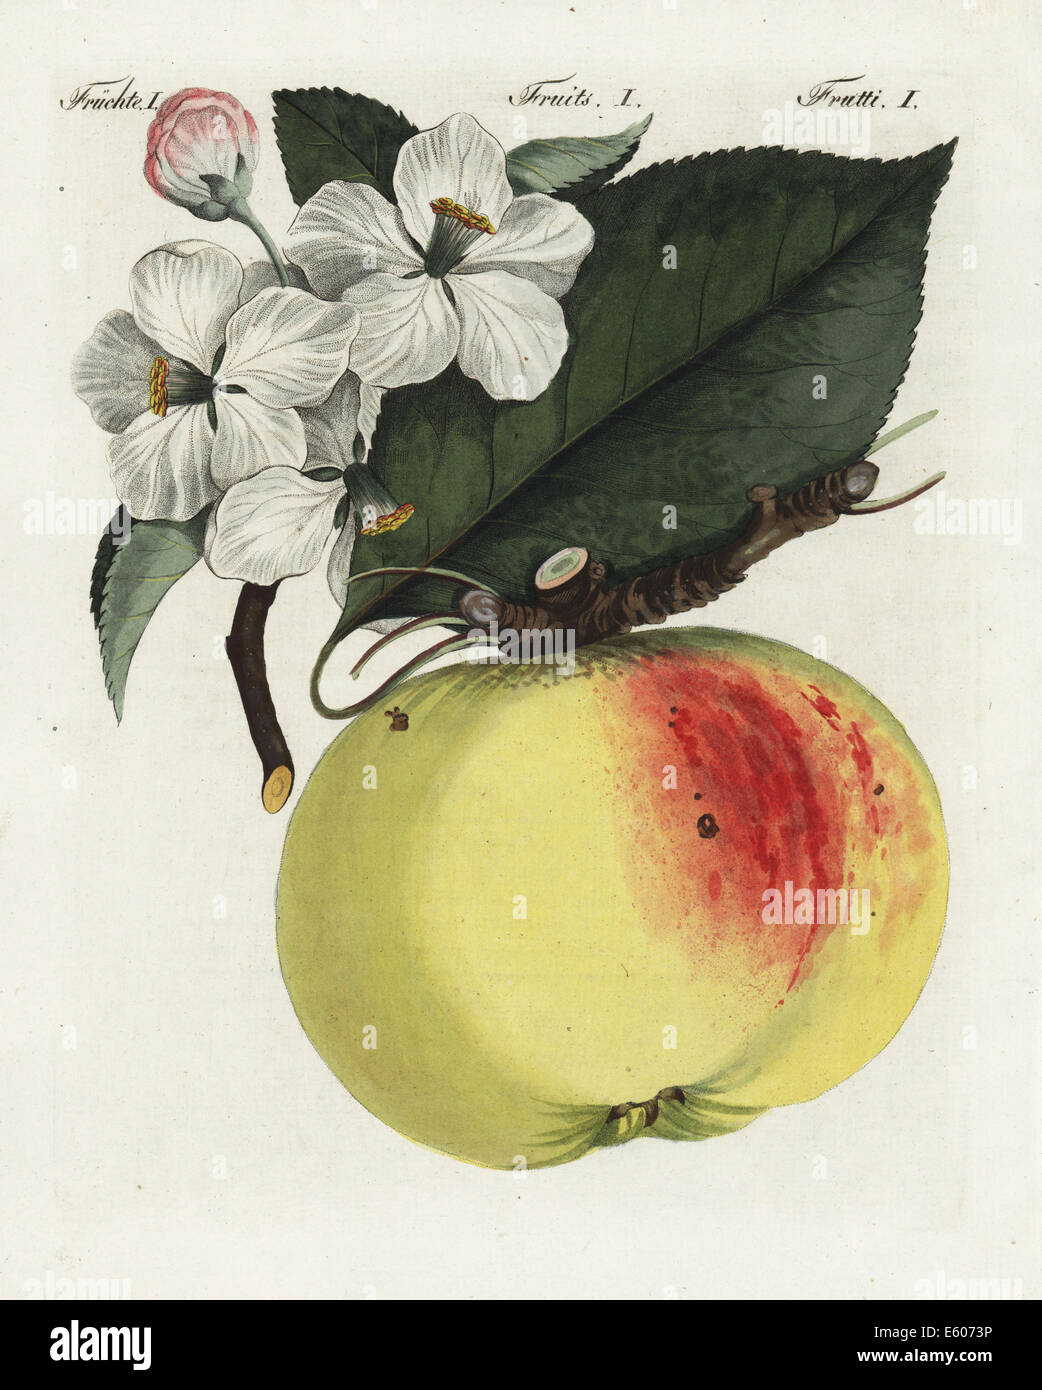 Giant apple, blossom, leaf and fruit, Malus domestica. Stock Photo